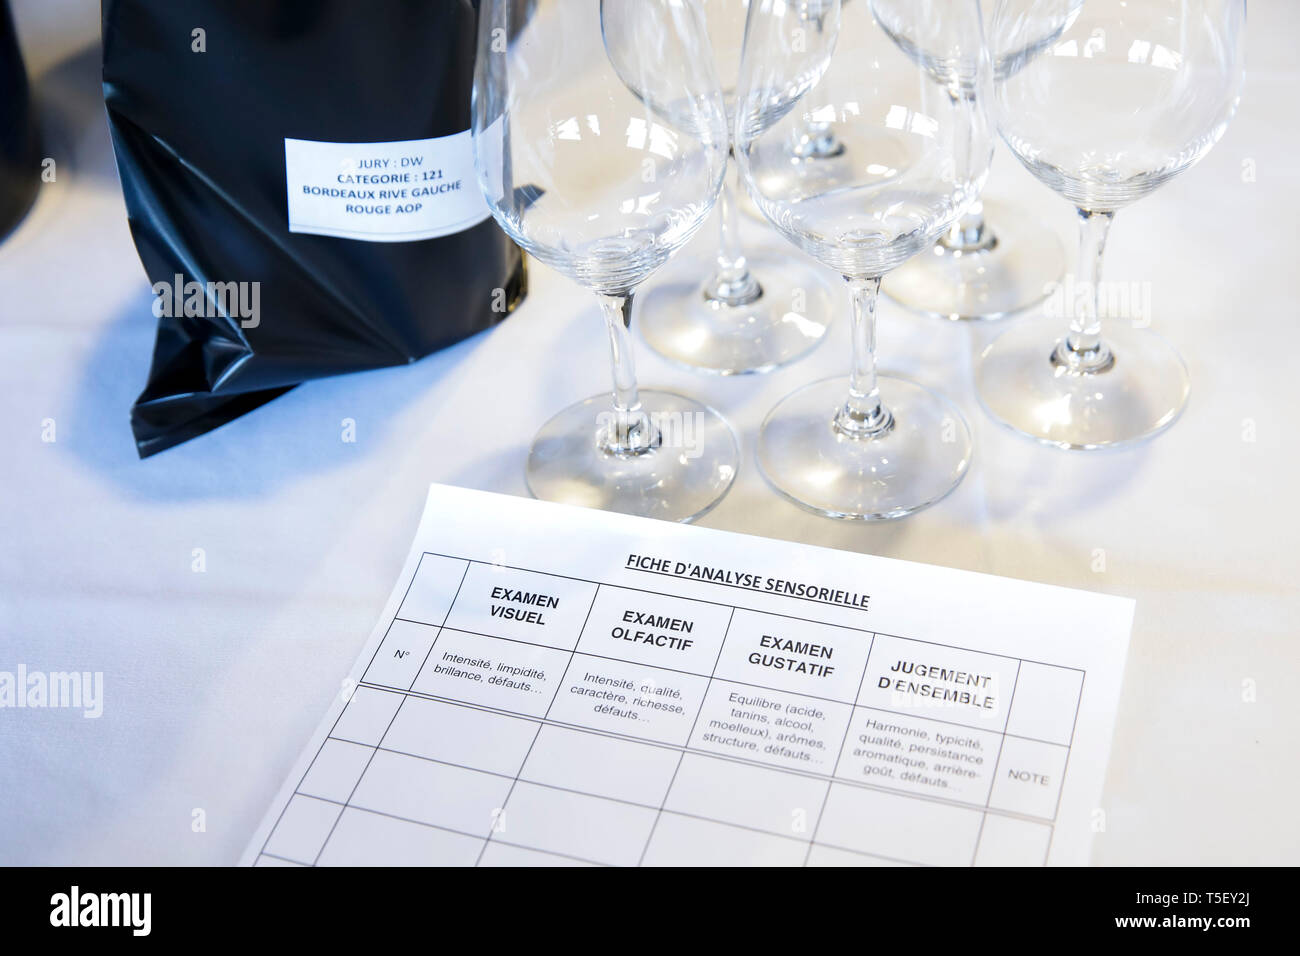 Illustration, blind wine tasting contest: sensory tasting grid to rate the wine after a visual, olfactory and gustatory analysis as well as an overall Stock Photo